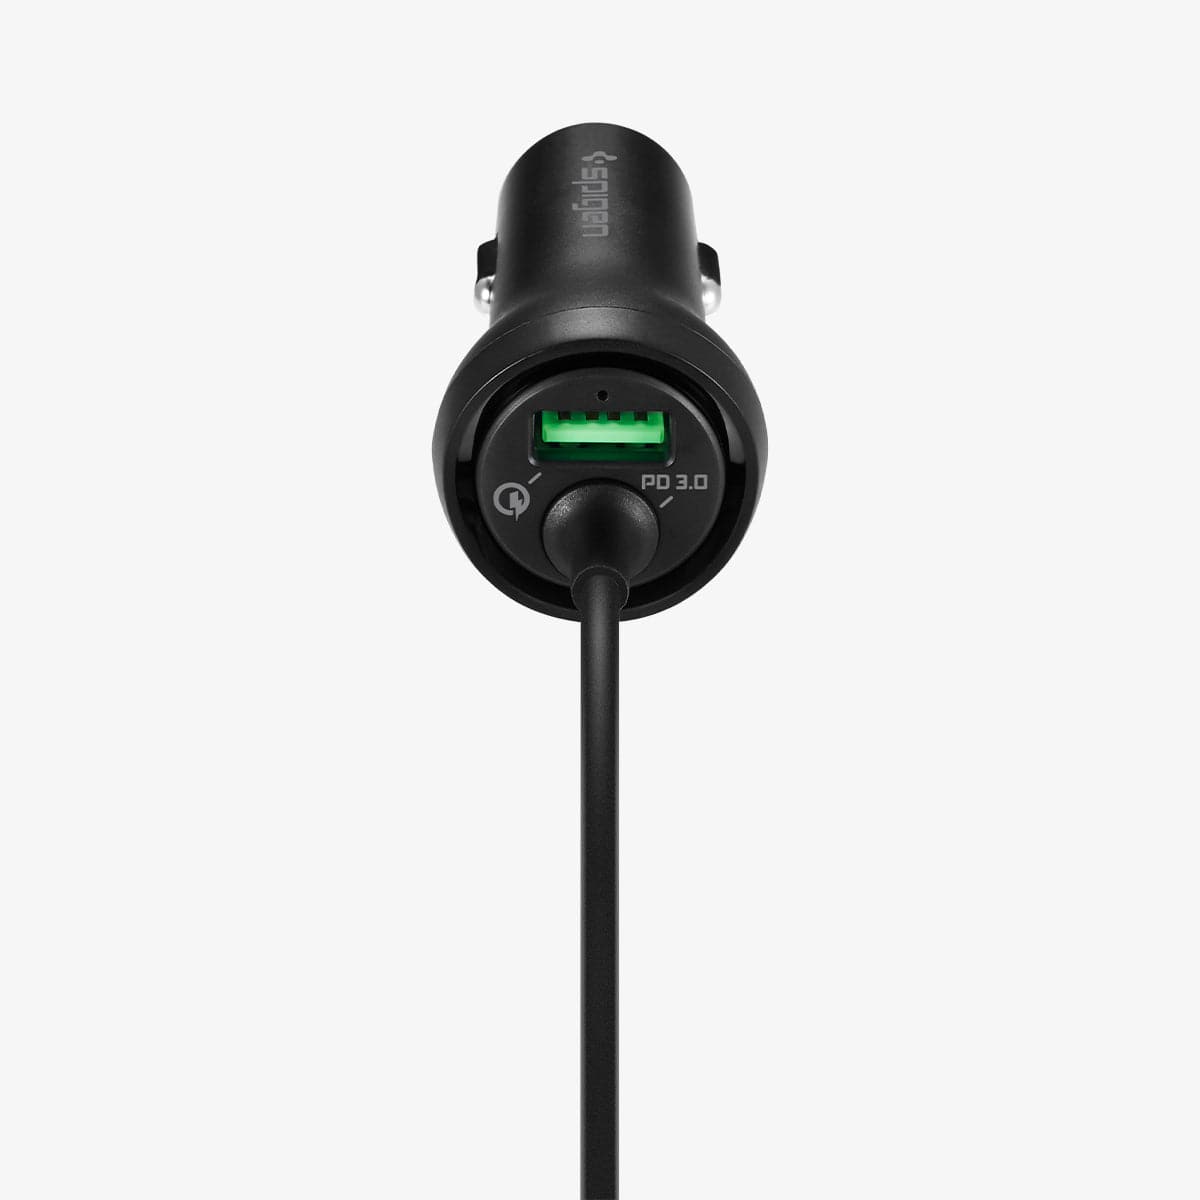 000CP25596 - SteadiBoost™ Built-in USB-C PD3.0 Car Charger showing the front and top